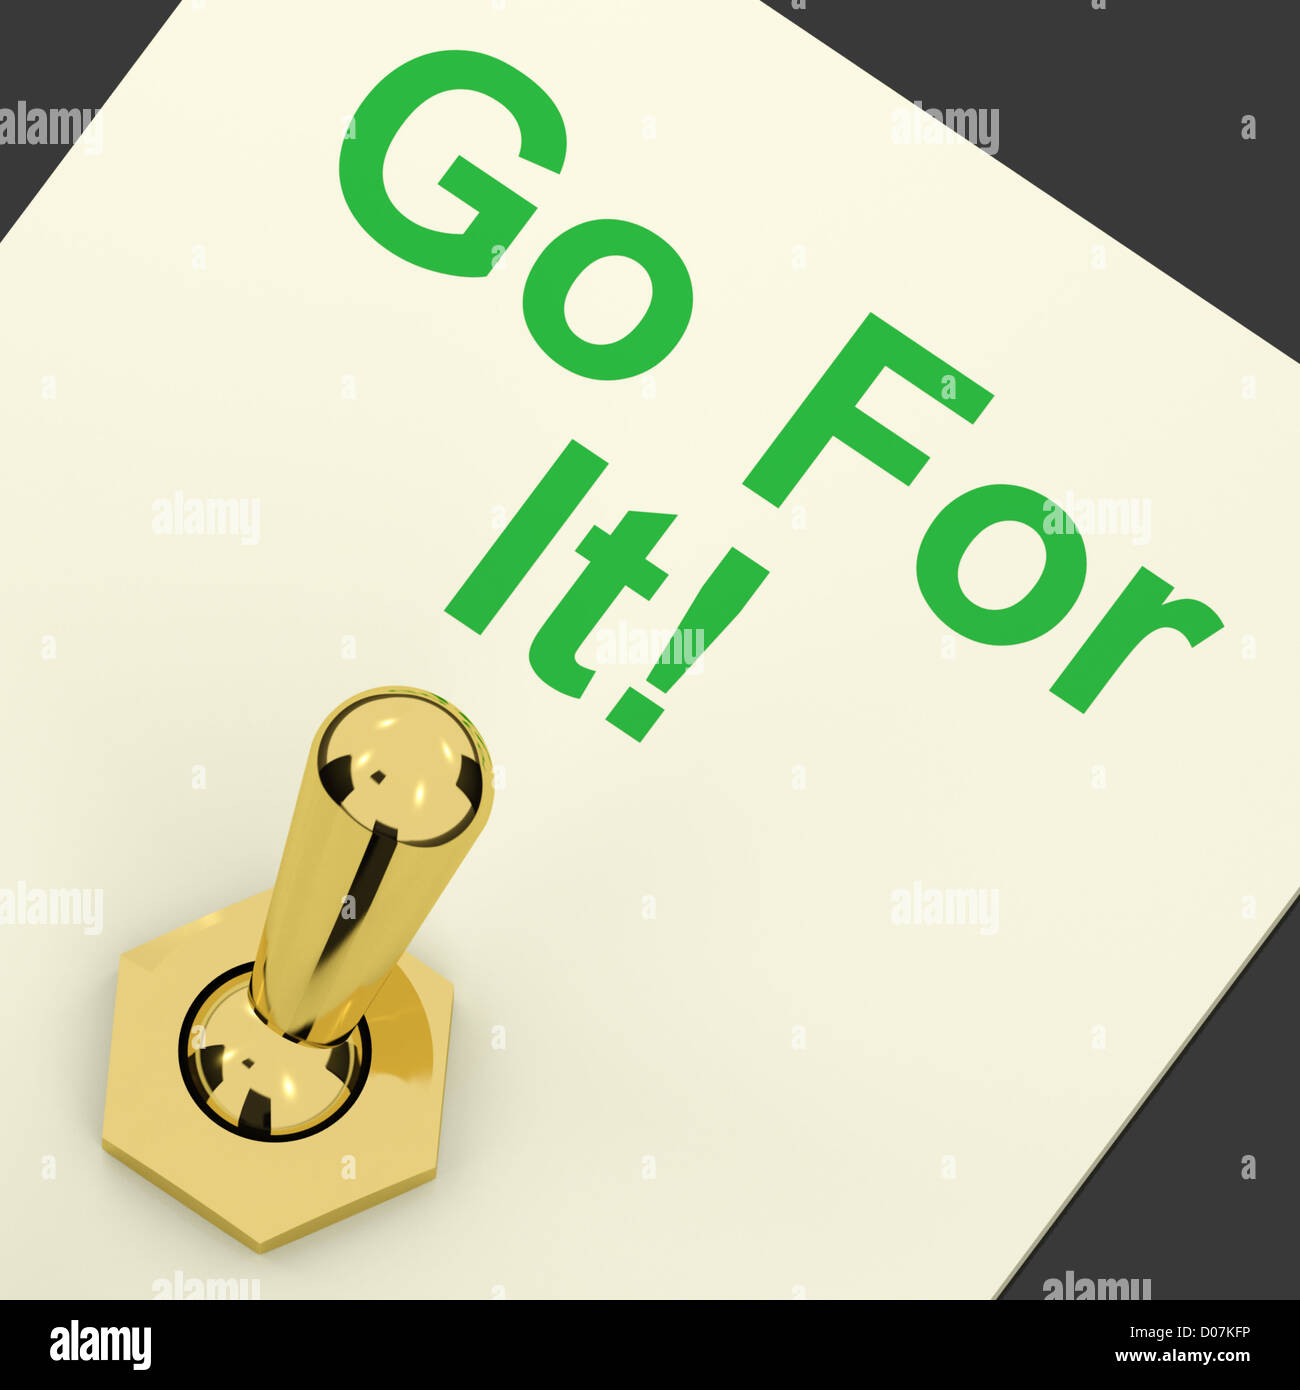 Go For It Gold Switch For Motivation And Action Stock Photo